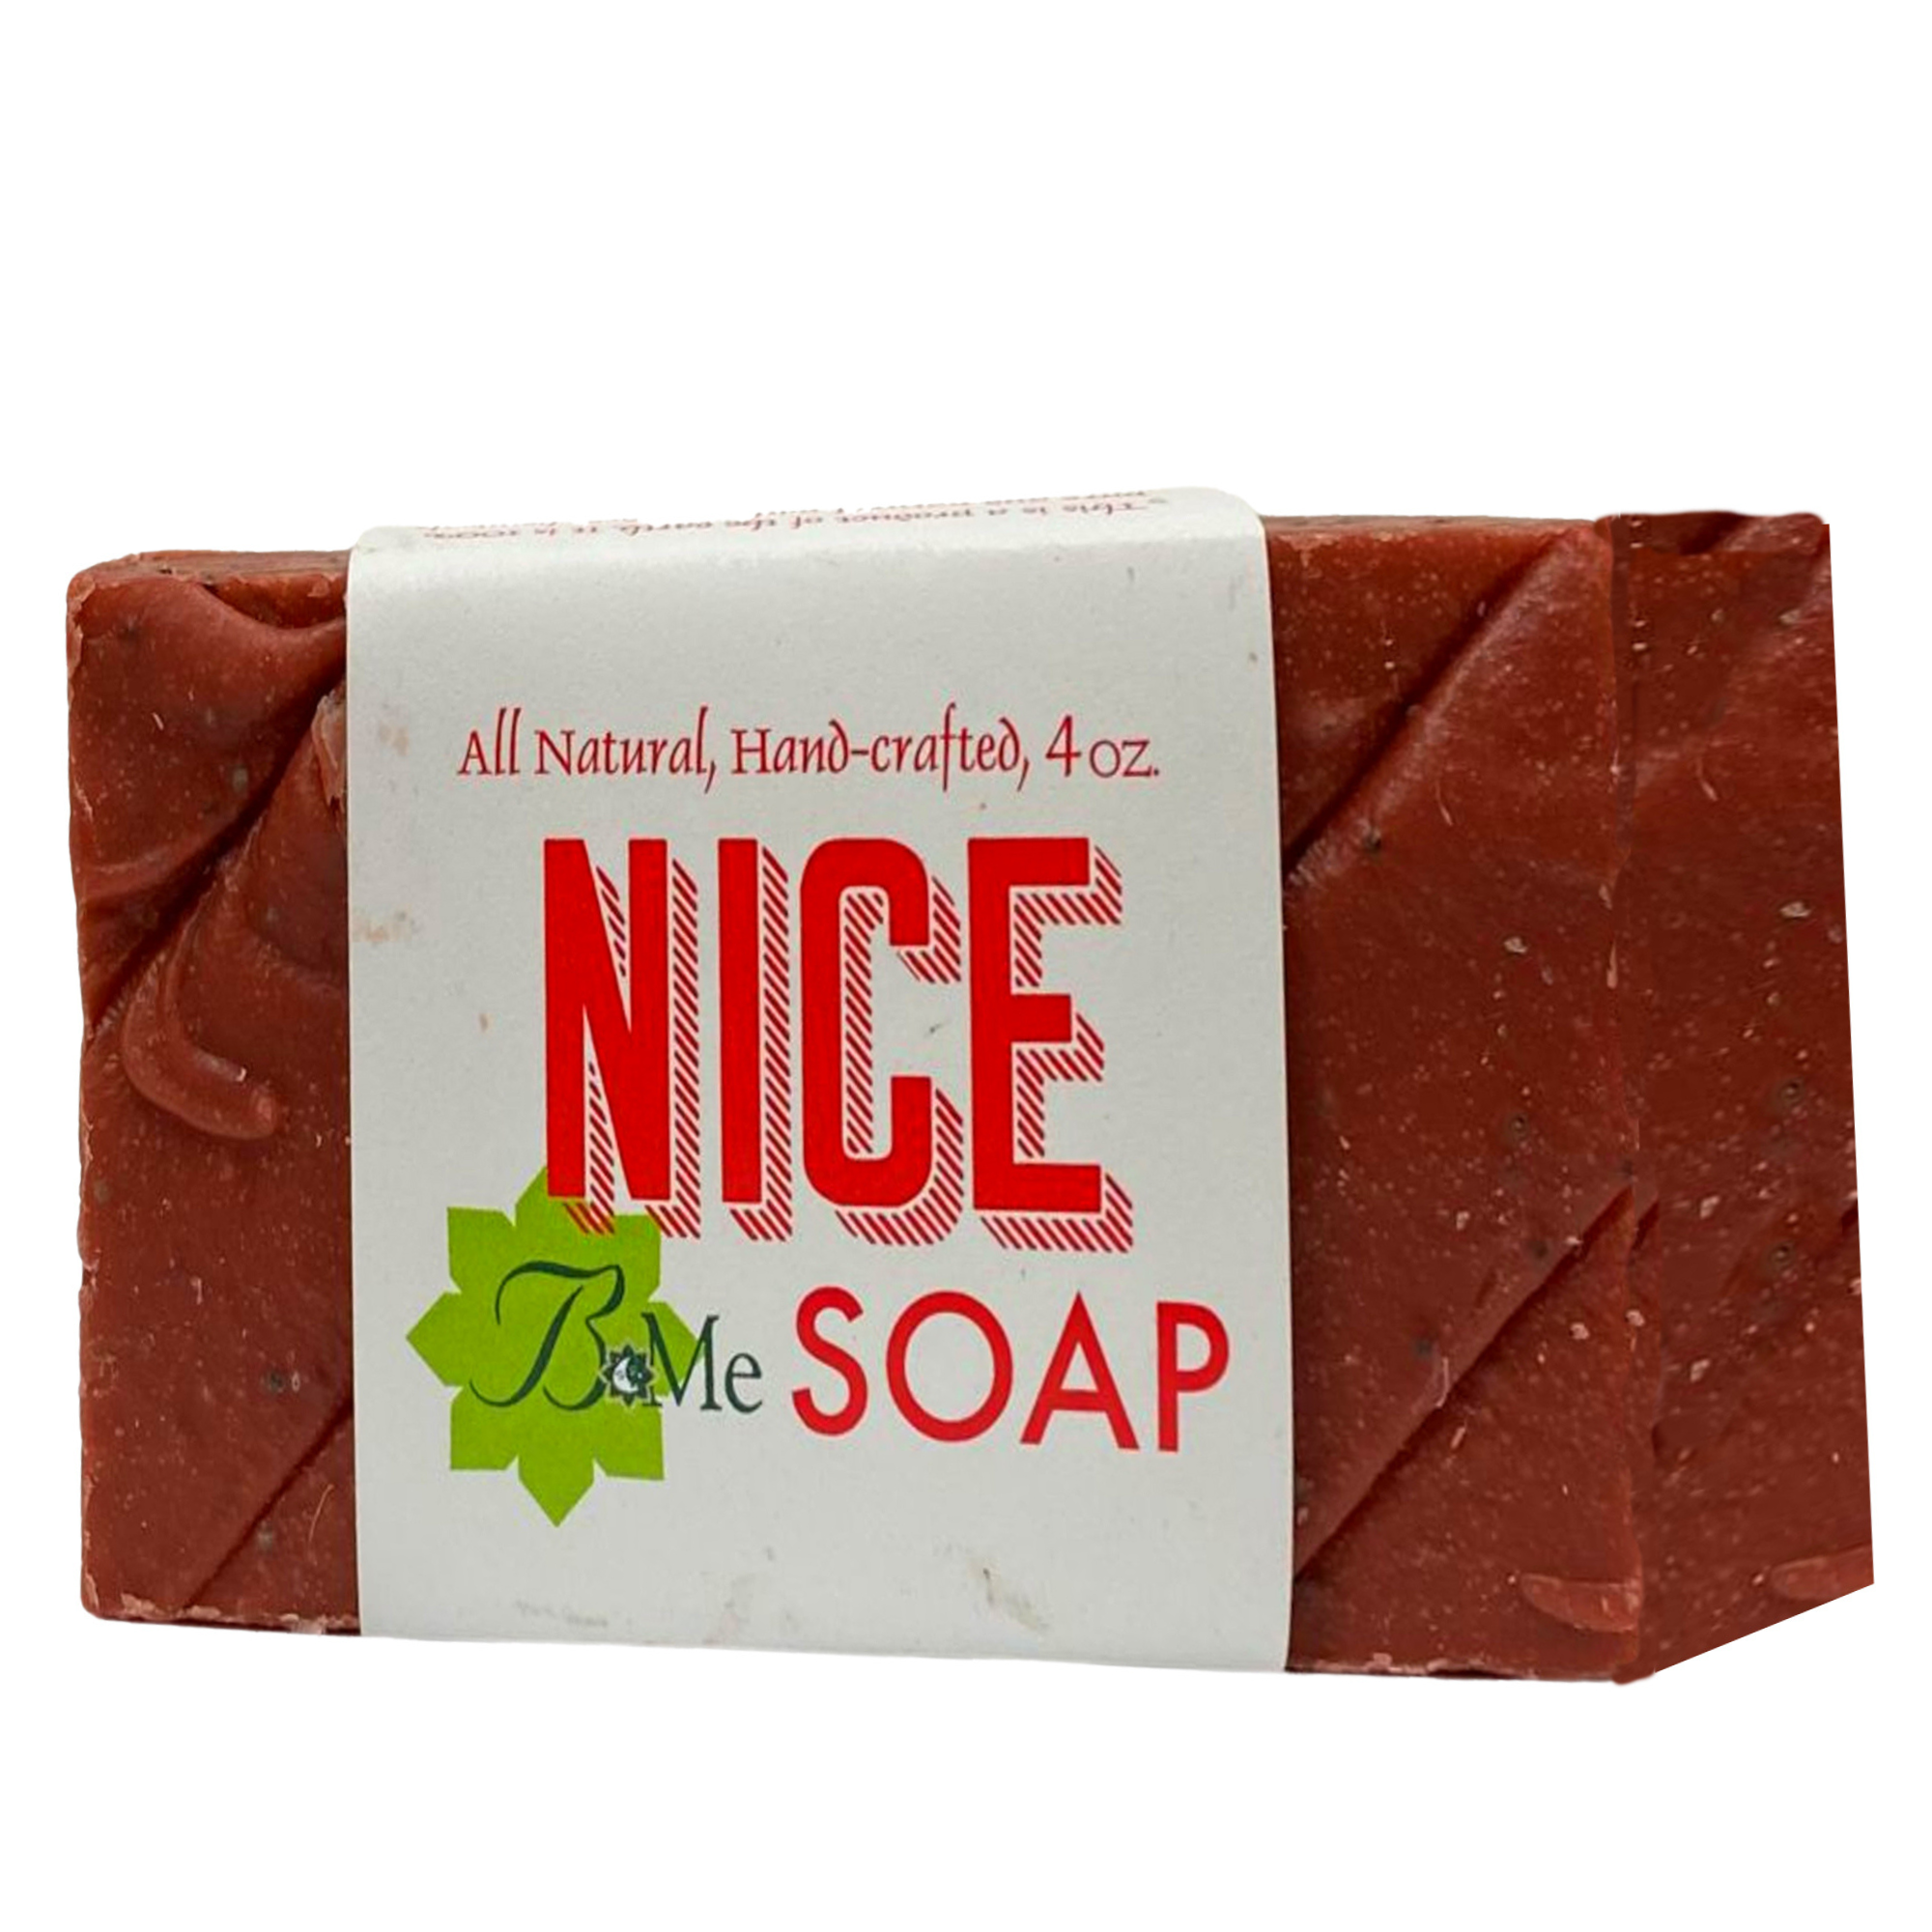 Nice Soap (Buy 1, Add 2 More for FREE)